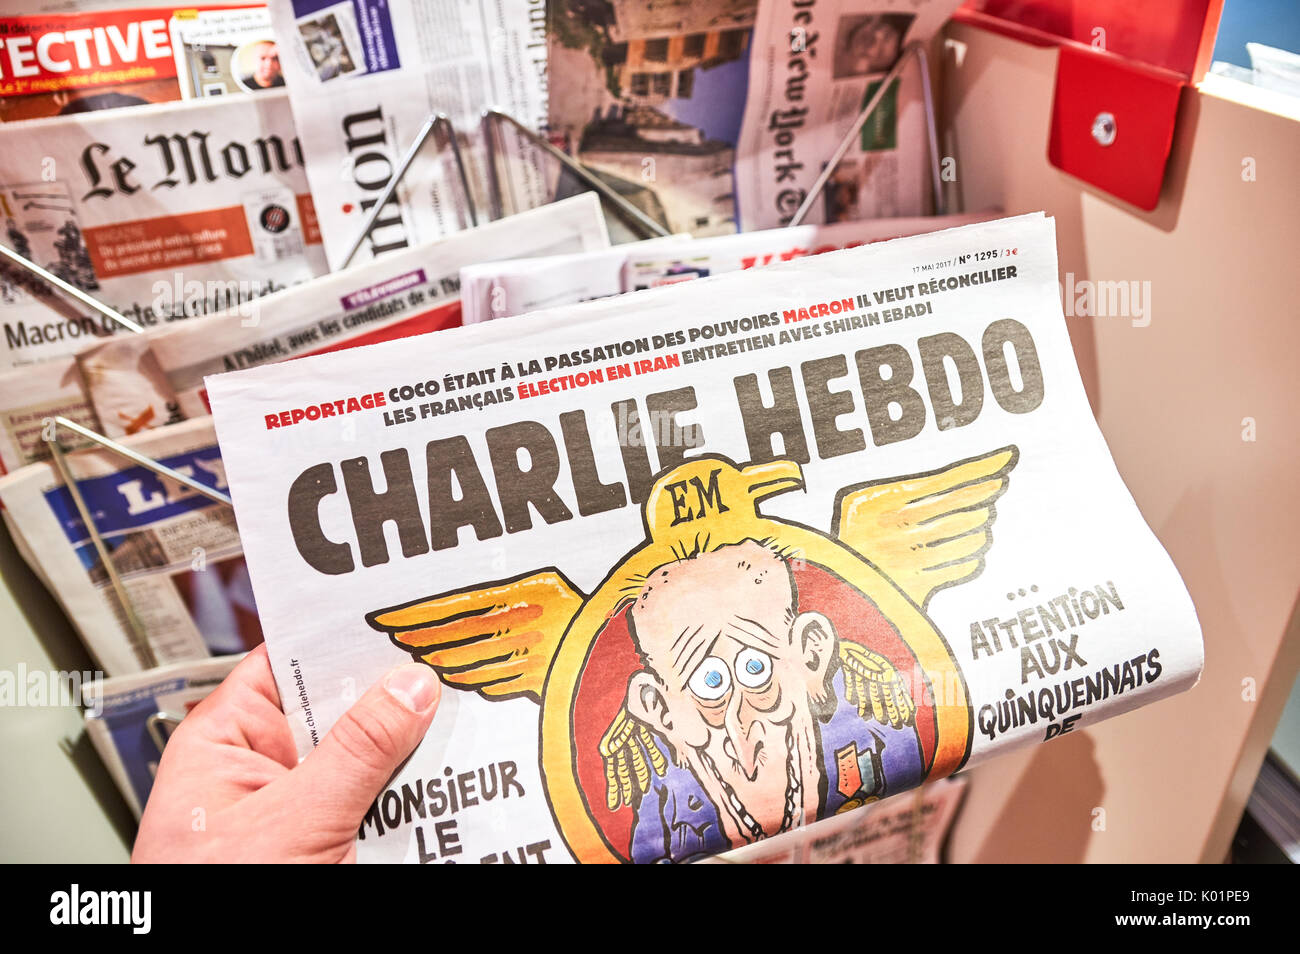 PARIS, ENGLAND - MAY 14, 2017 : A hand holding Charlie Hebdo over newsstand background in Paris. Charlie Hebdo is a French satirical weekly magazine,  Stock Photo